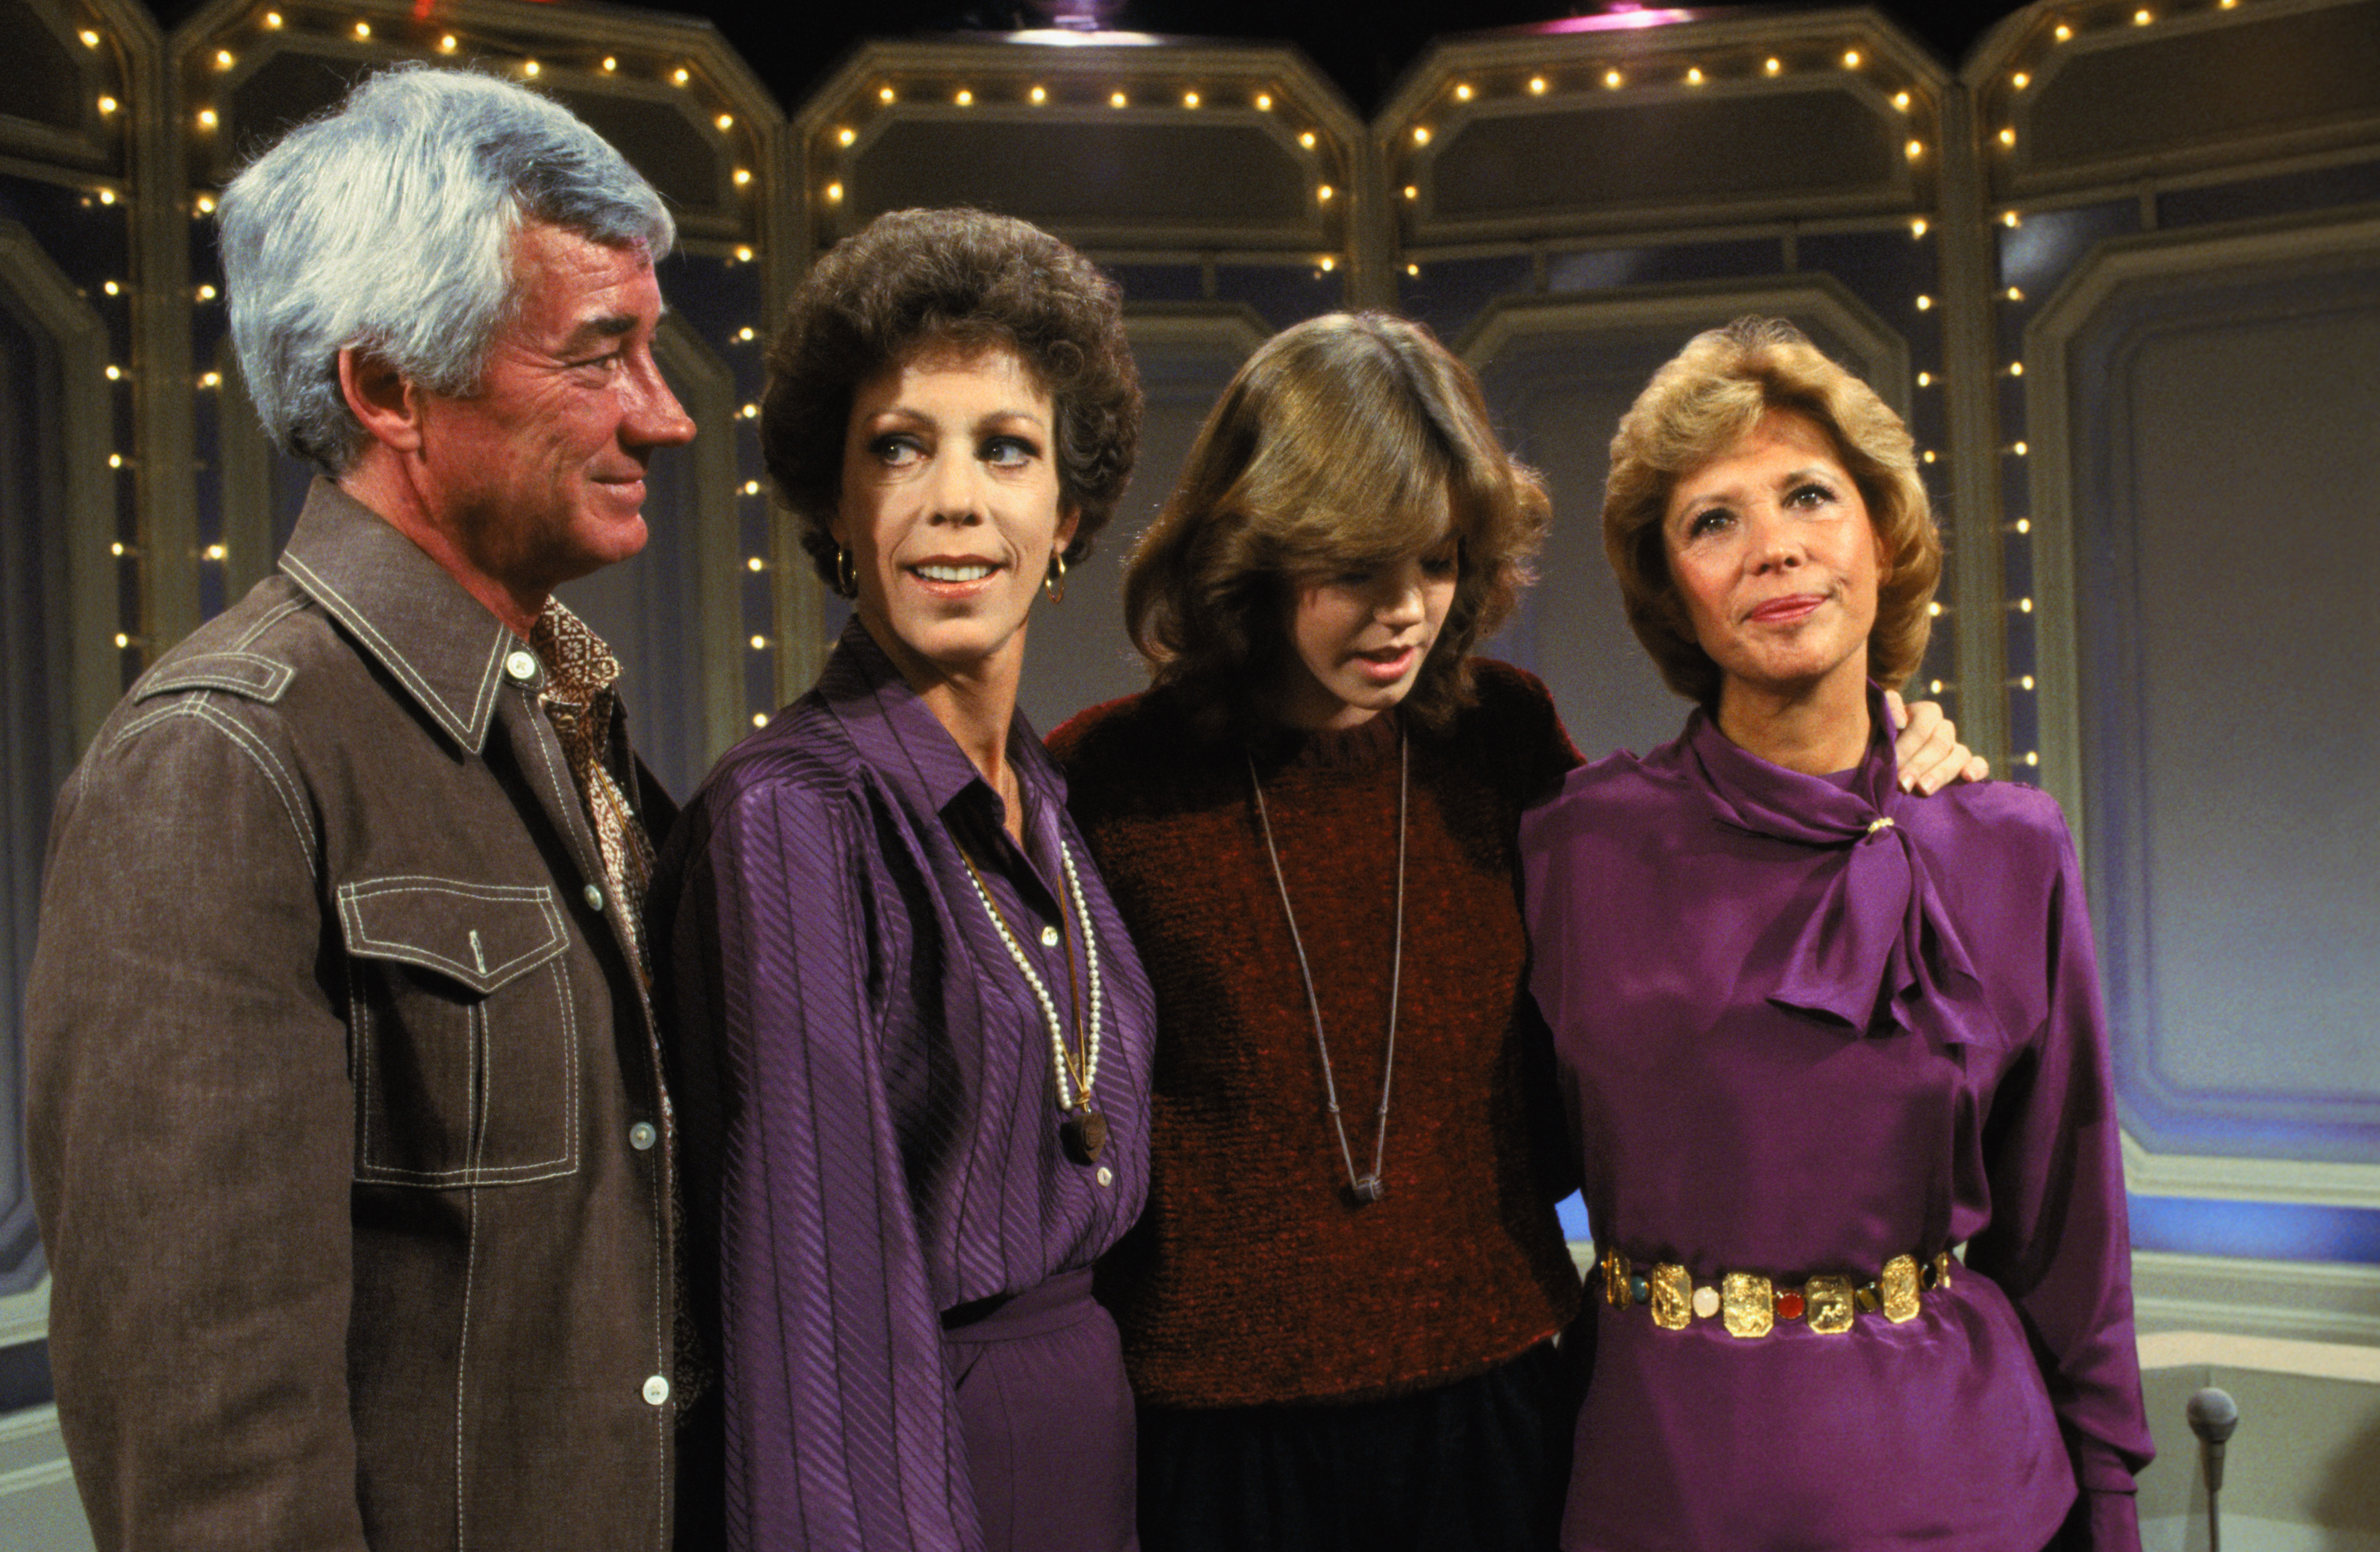 Carol Burnett, Joe Hamilton, Carrie Hamilton and Dinah Shore on "Dinah! and Friends" in 1979 | Source: Getty Images